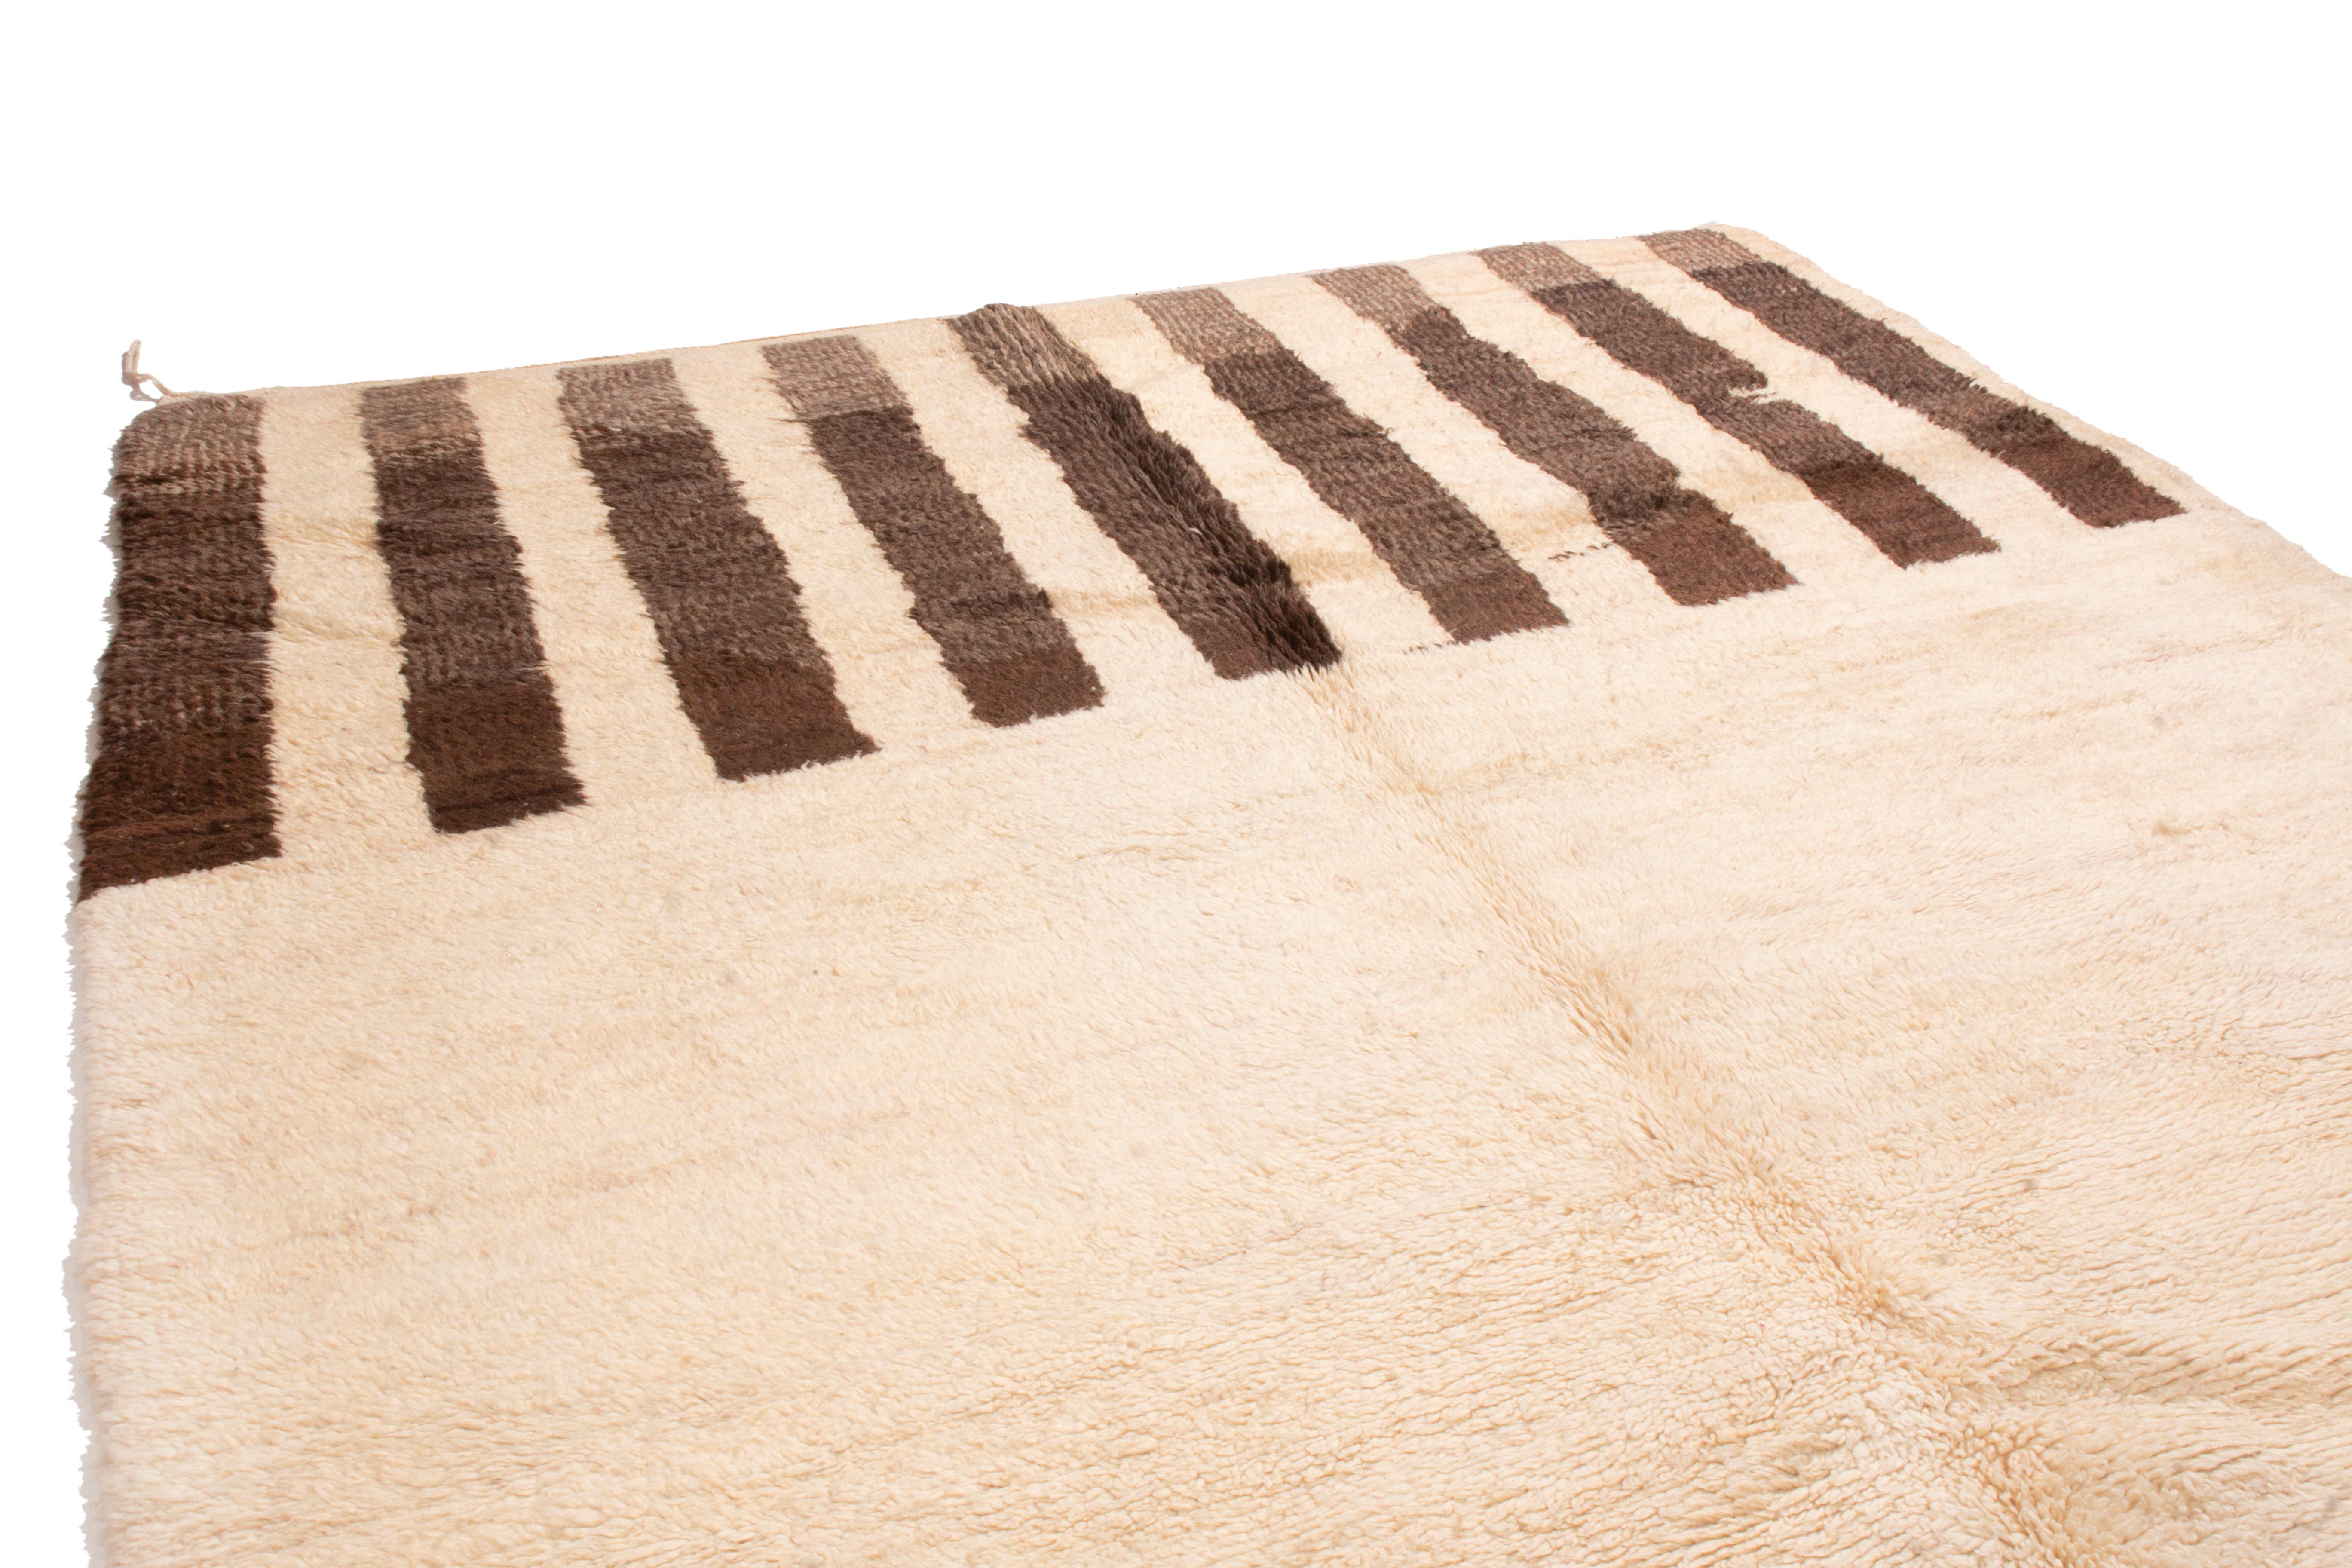 1950s Mid-Century Vintage Moroccan Rug Beige Brown Open Field Pattern
About the Collection: From the antique and vintage riches of the Berber weavers to the exciting newer loom productions, our Moroccan collection enjoys a diversity of wool and